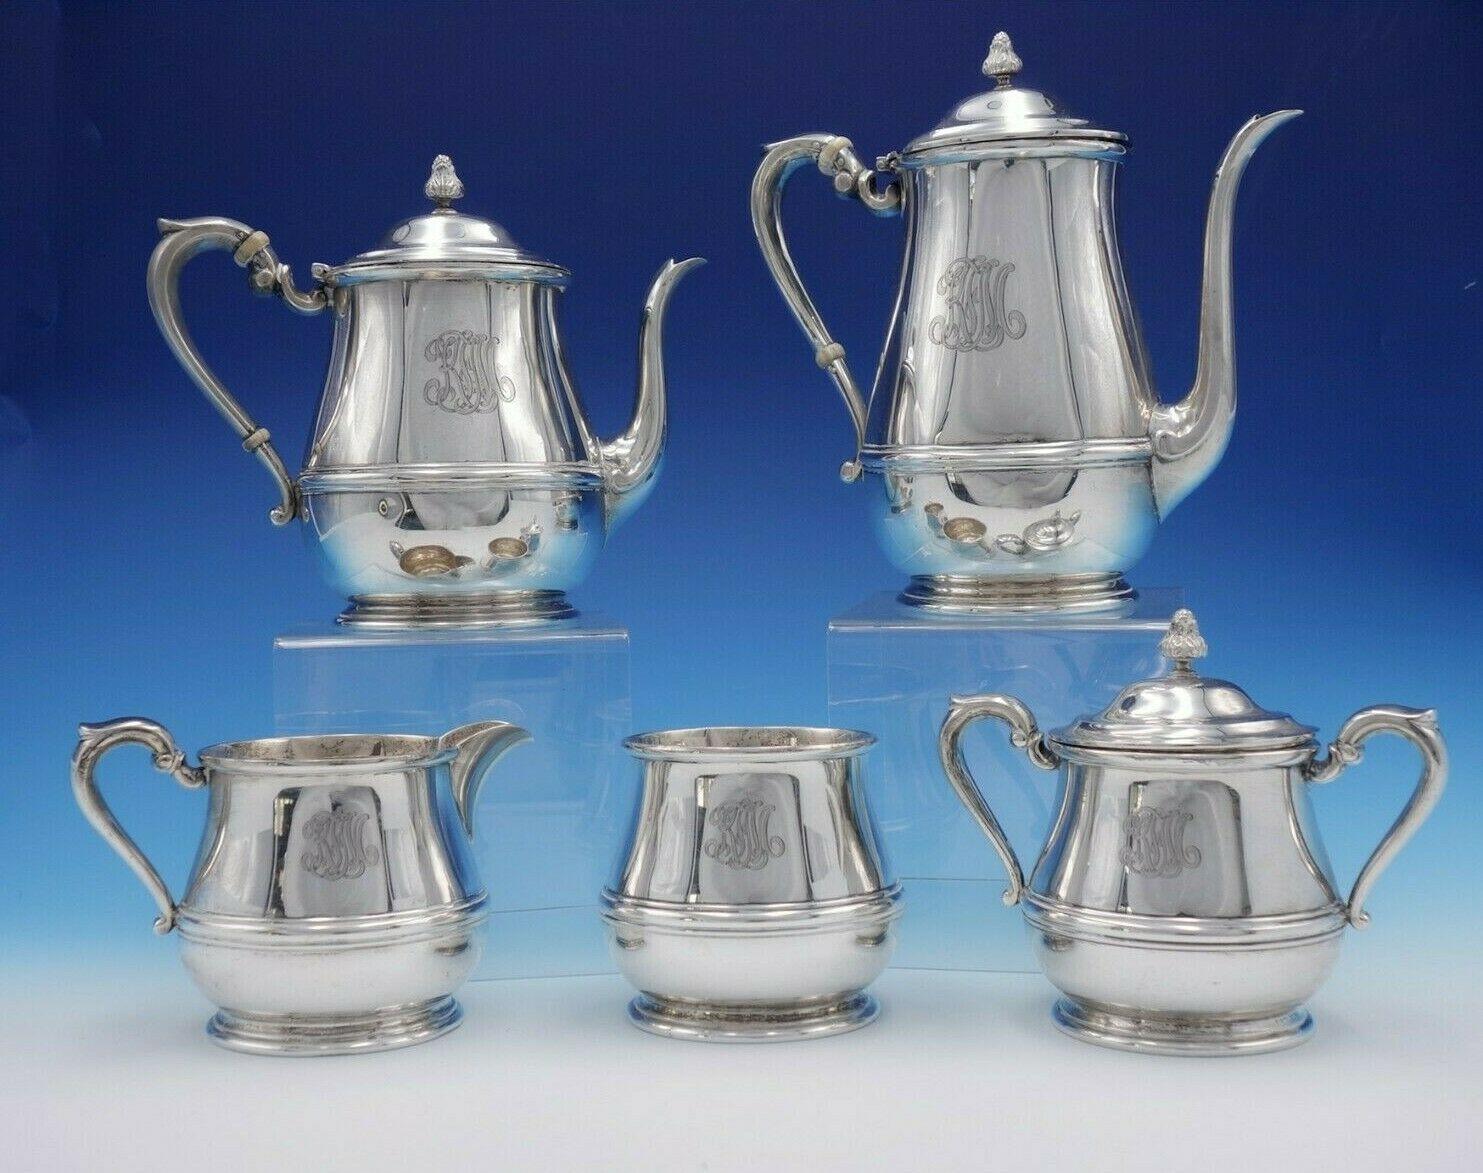 Debutante by Richard Dimes

Stunning Debutante by Richard Dimes sterling silver 5-piece tea set. All the pieces are marked with #81. This set includes:

1 - Coffee pot: Measures 8 3/4